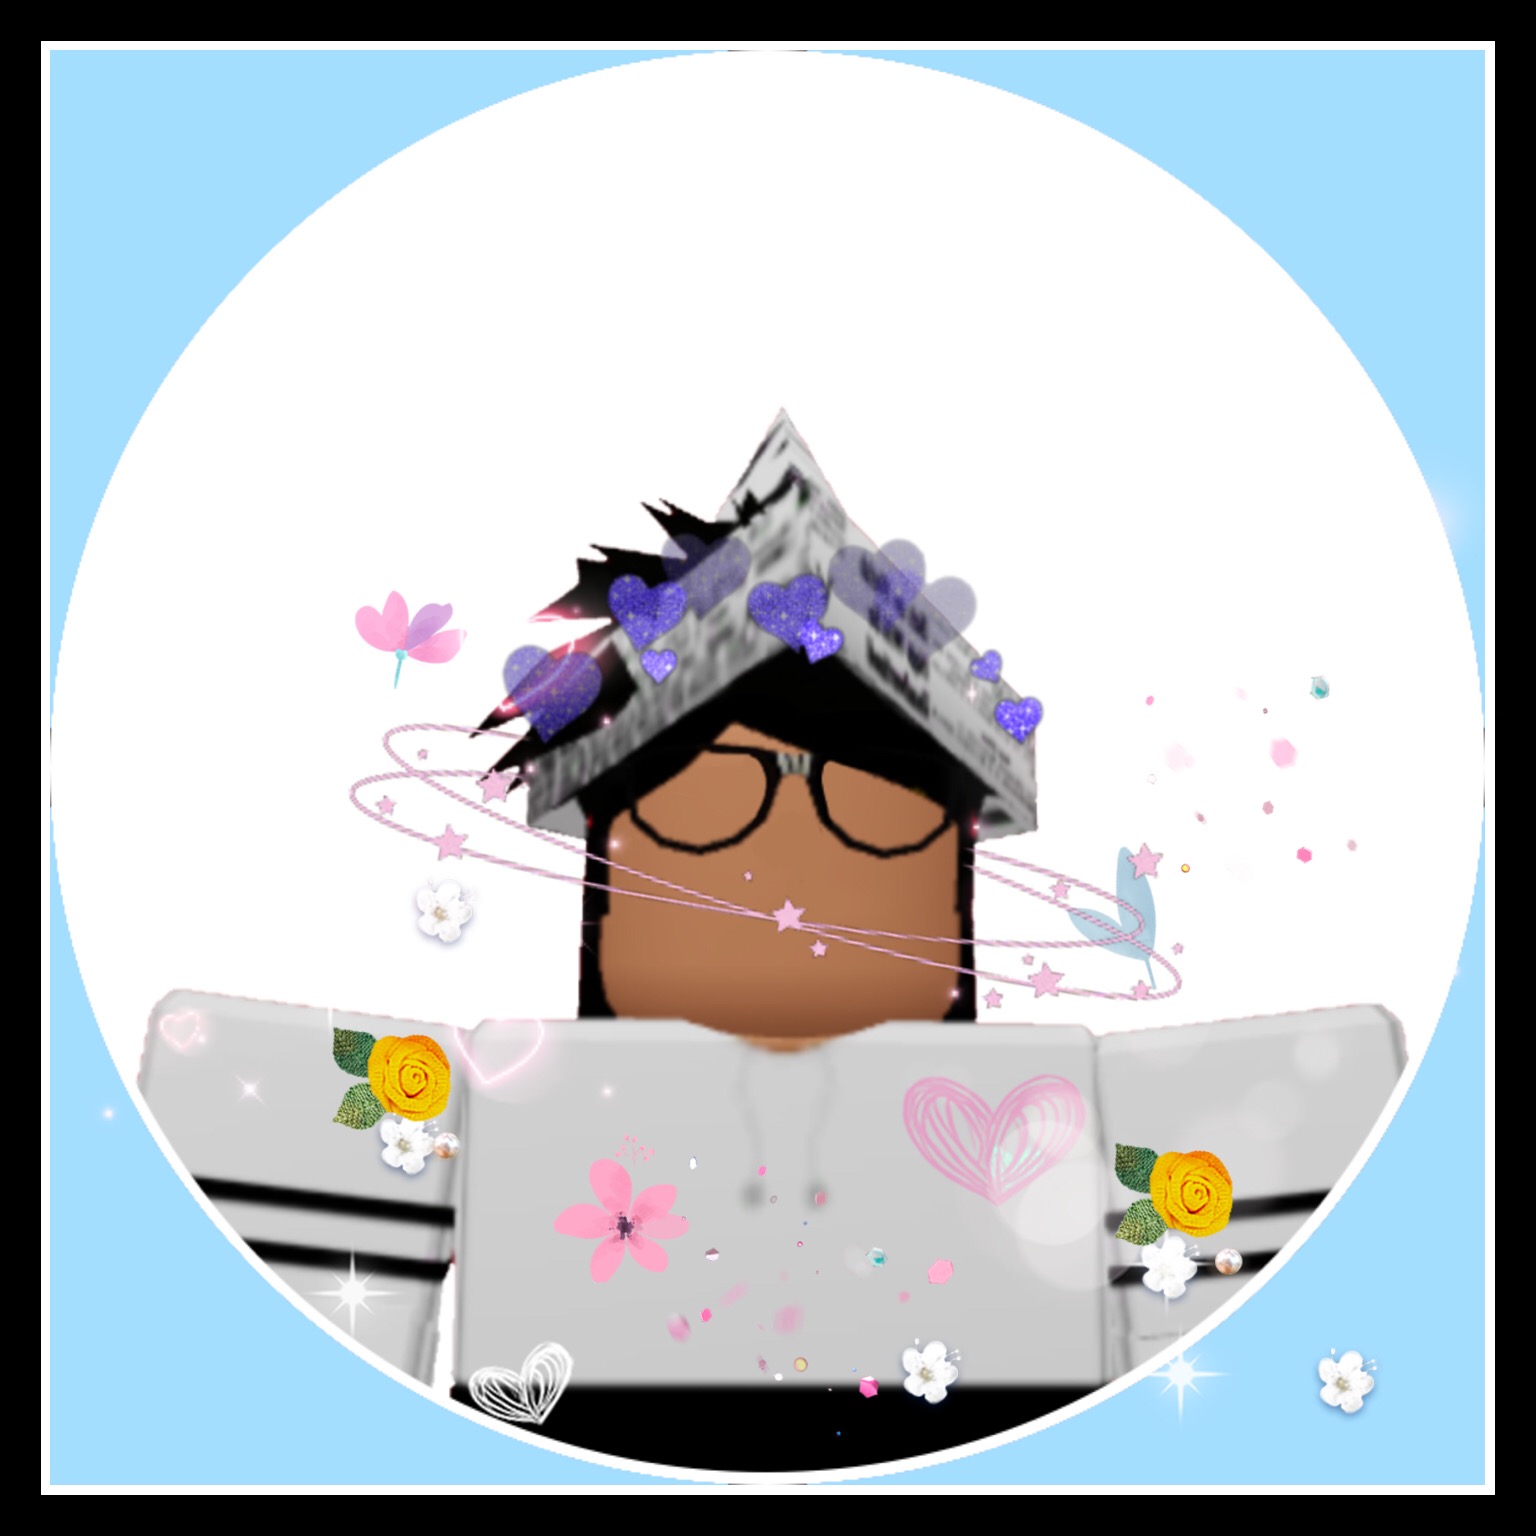 Bored Roblox Pfp Image By Swxrl - roblox pinkant bored image by aaliyahmorales11